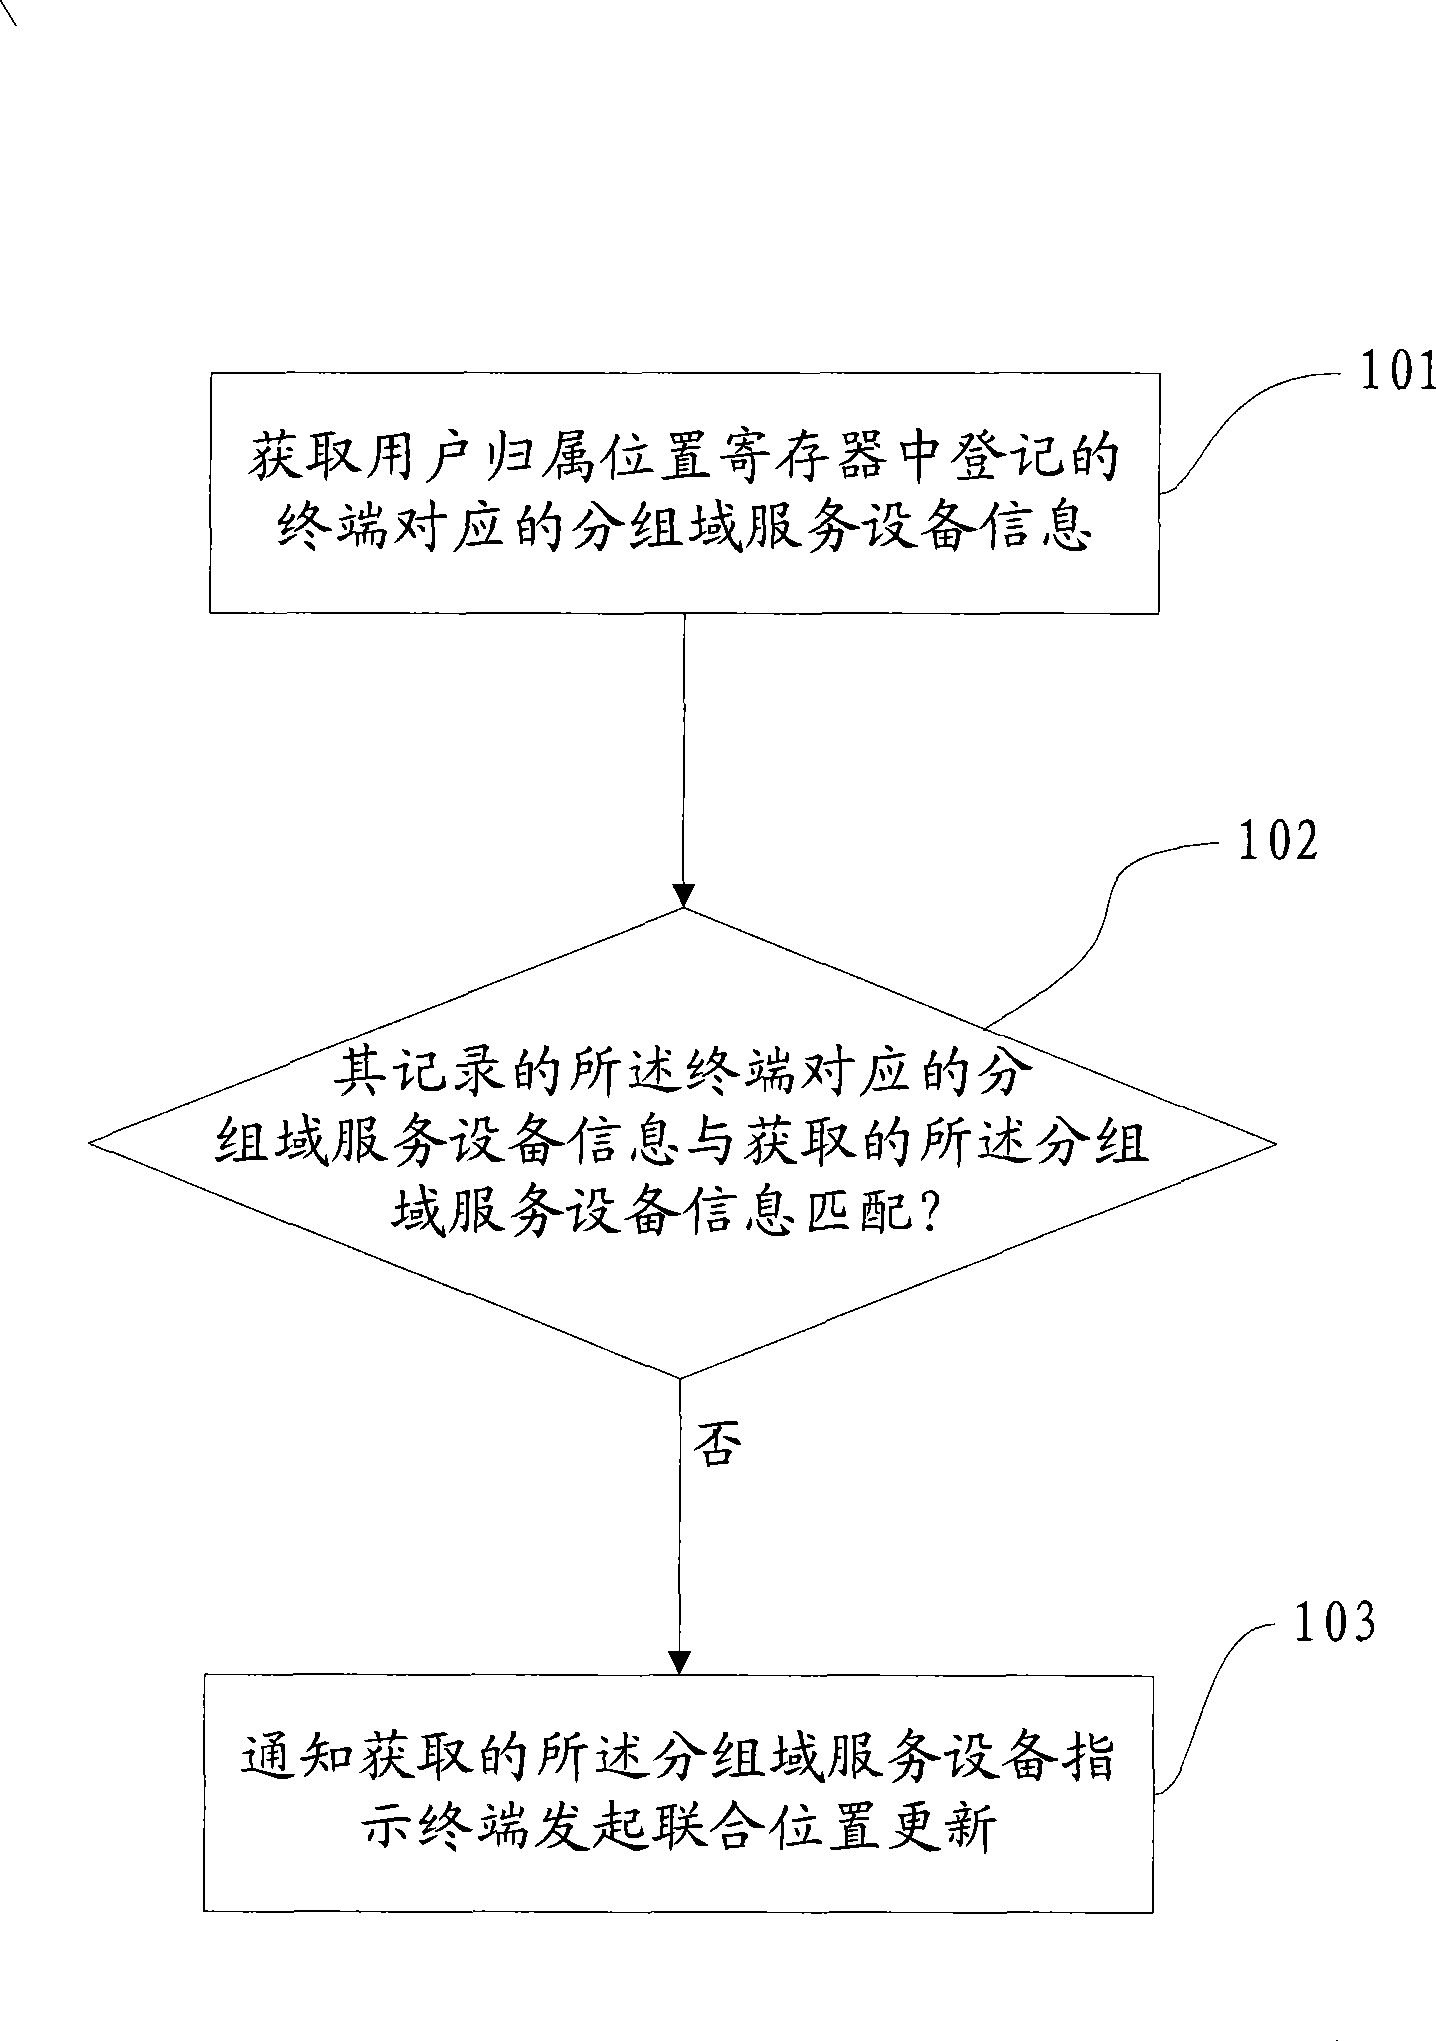 Method, apparatus and system for position information synchronization by packet domain and circuit domain